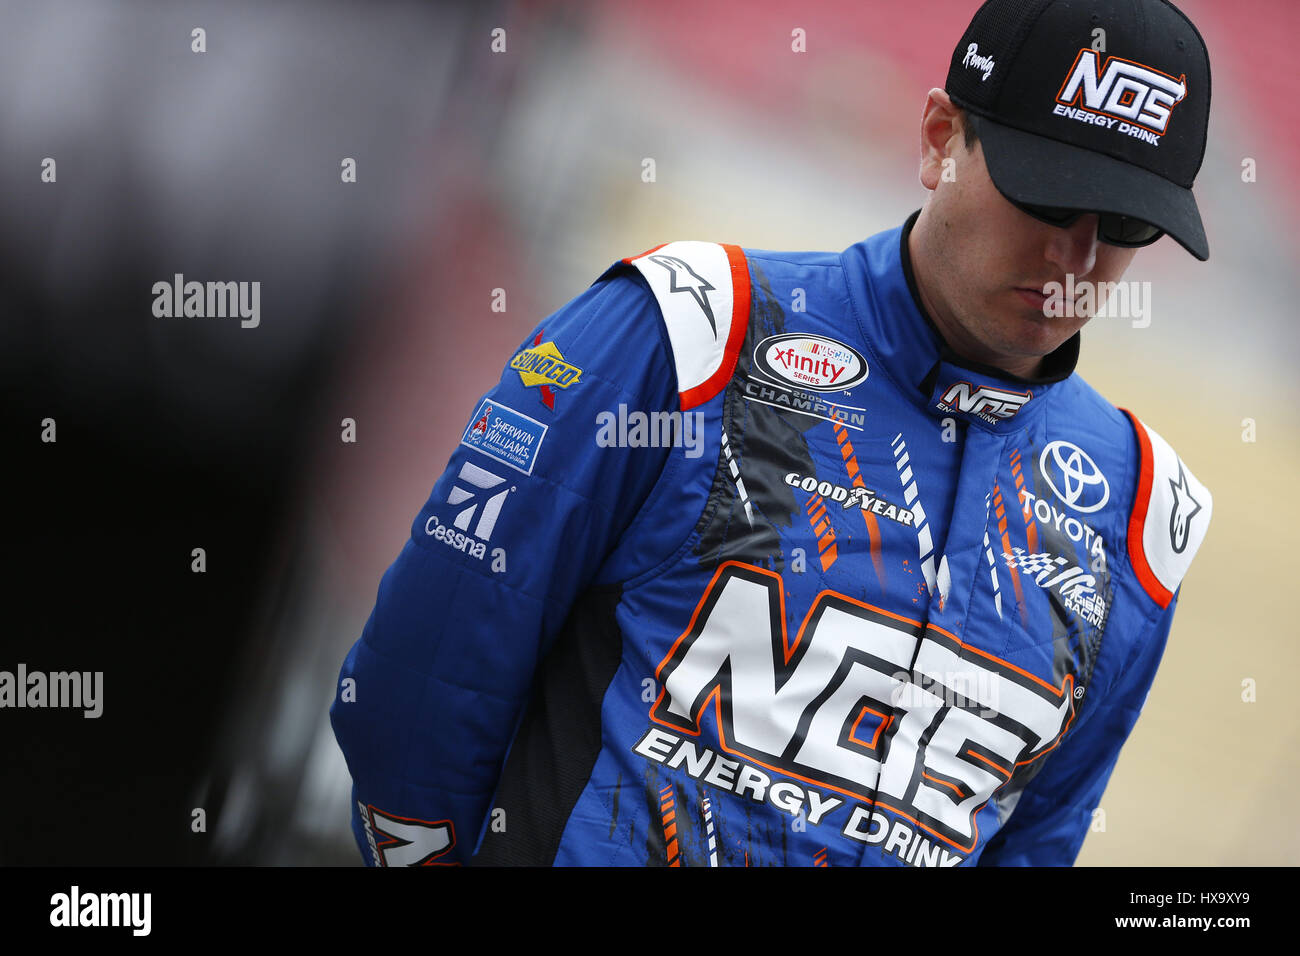 Fontana, California, USA. 25th Mar, 2017. March 25, 2017 - Fontana, California, USA: Kyle Busch (18) hangs out on pit road during qualifying for the NASCAR Xfinity Series NXS 300 at Auto Club Speedway in Fontana, California. Credit: Justin R. Noe Asp Inc/ASP/ZUMA Wire/Alamy Live News Stock Photo